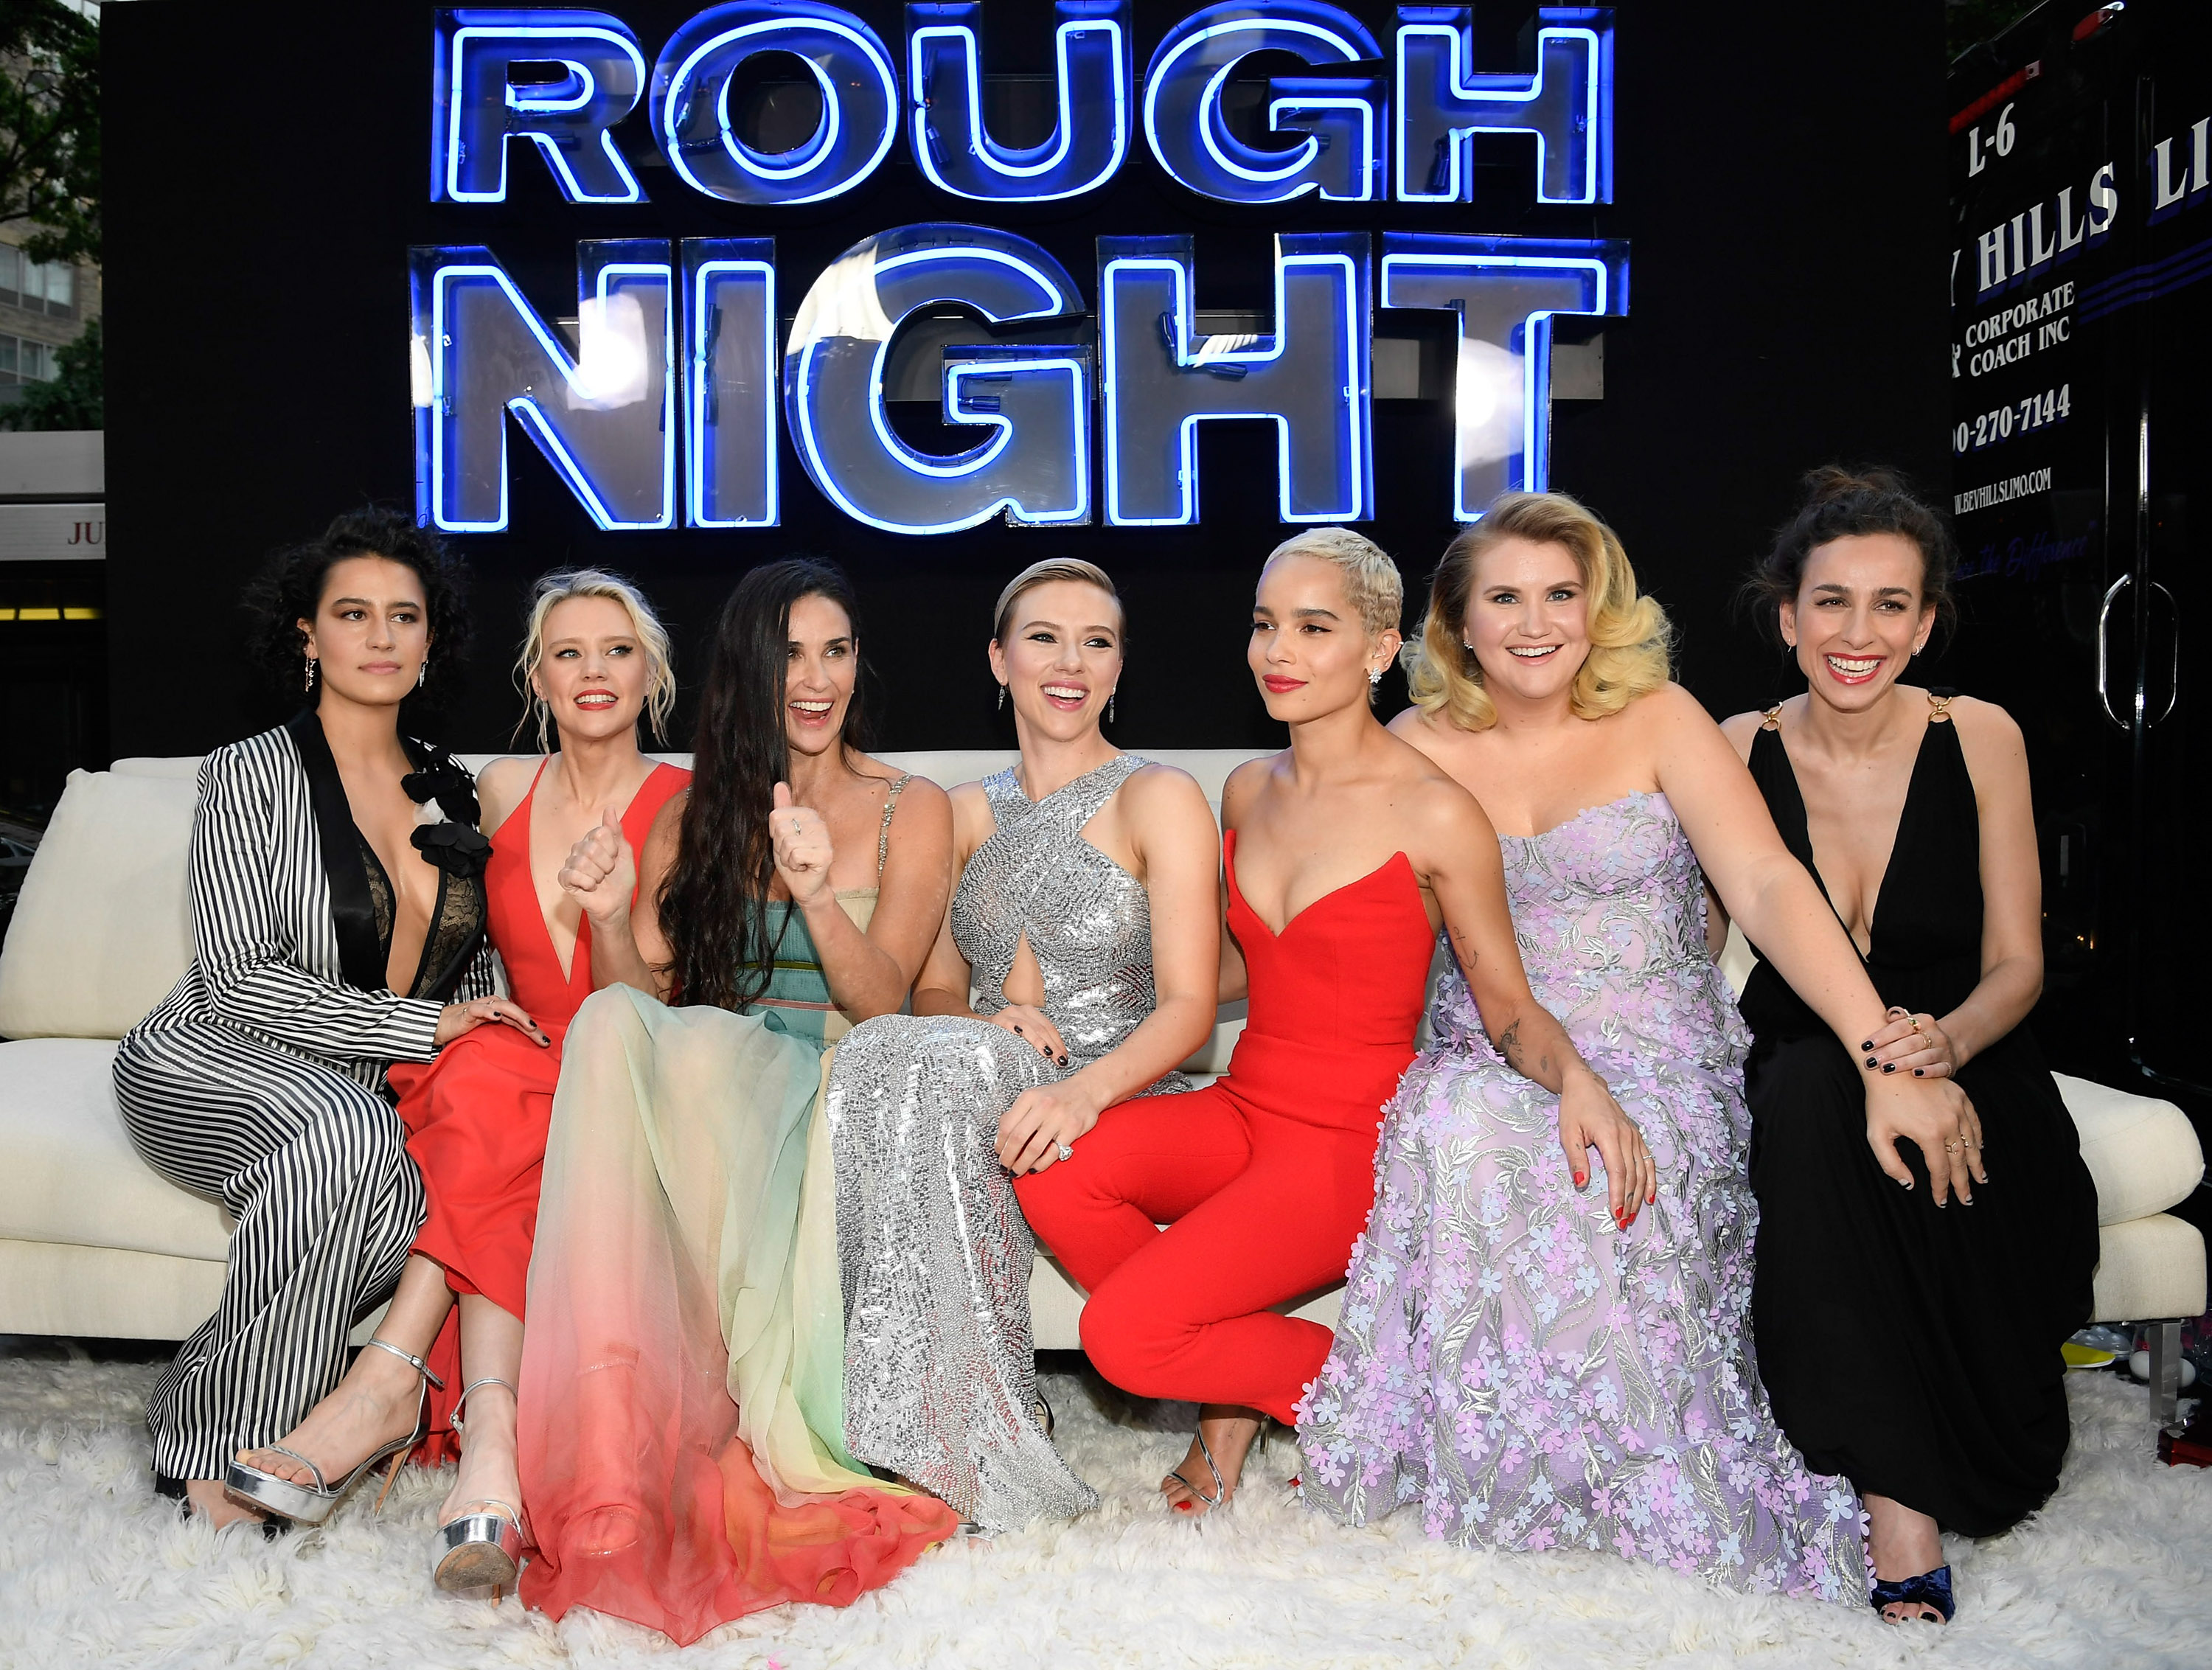 Rough Night' director gets real about female friendshipsnews.com